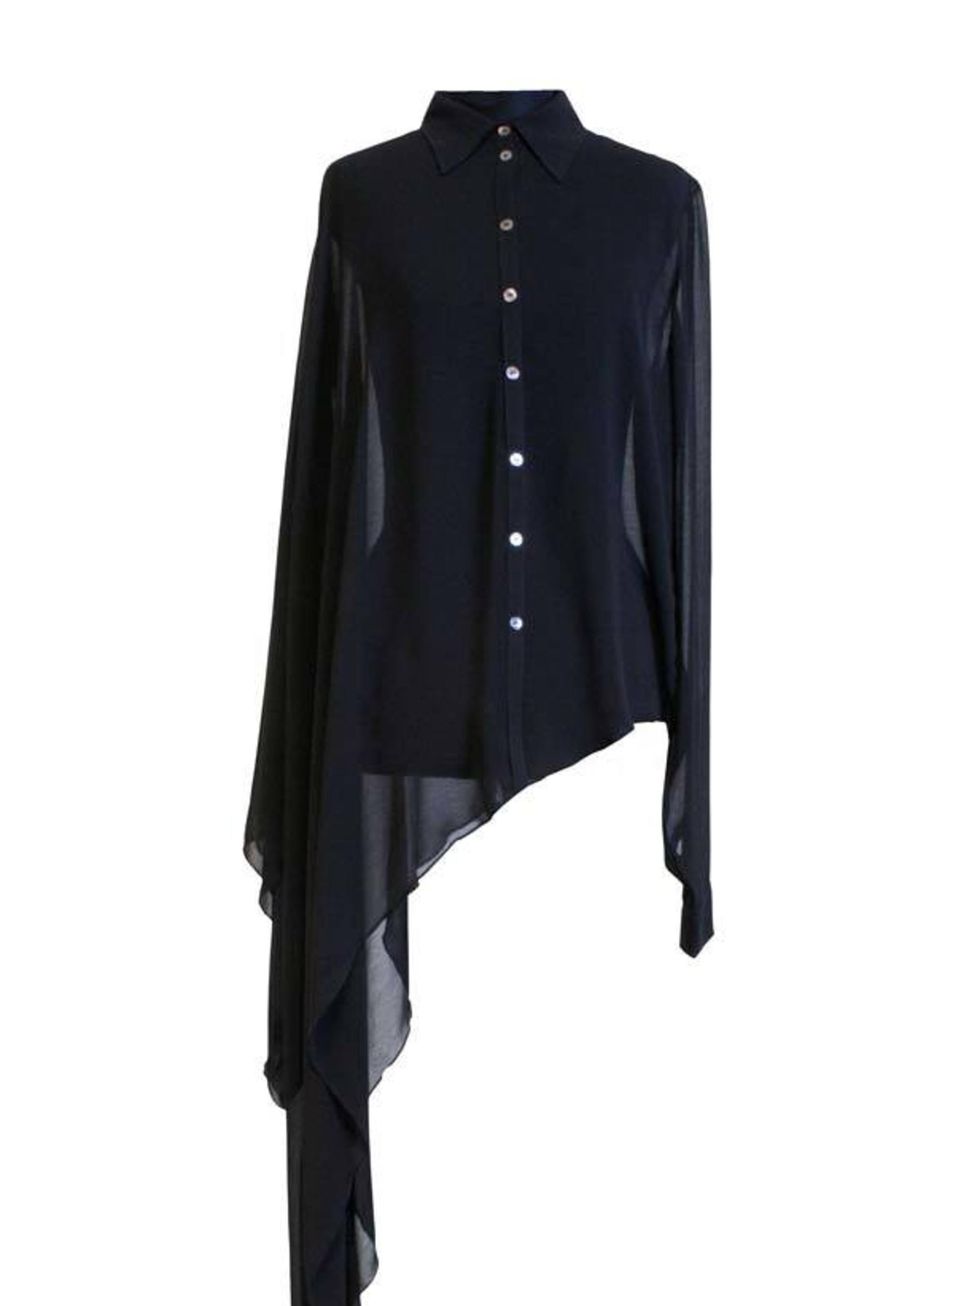 <p>BACK by Ann-Sofie Back black draped shirt, £165, at The Convenience Store, for stockists call 0208 968 9095</p>